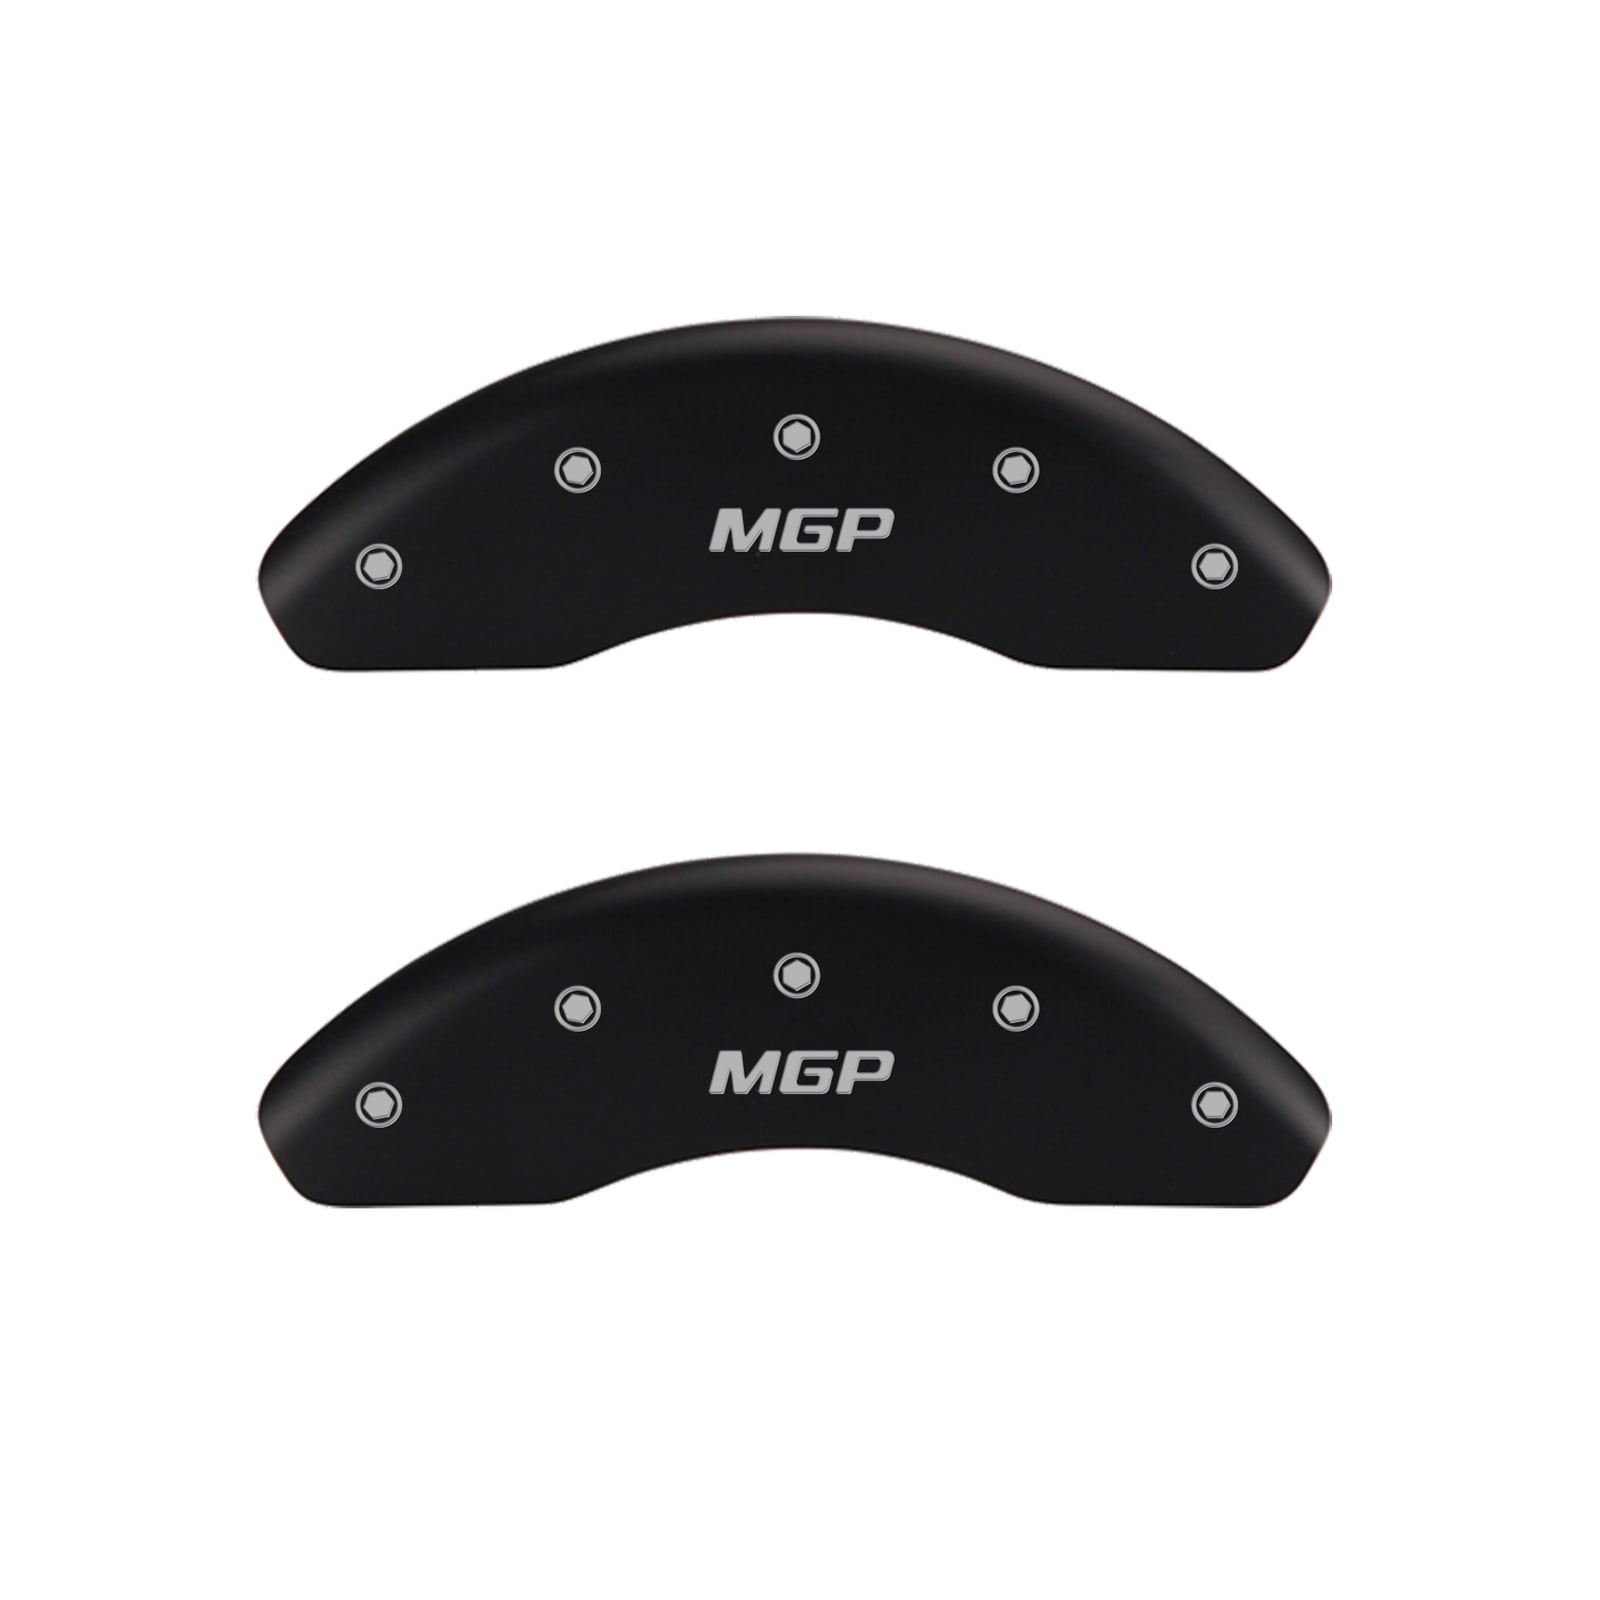 MGP Caliper Covers 14240SRS5BK Black Powder Coat Finish Front and Rear Caliper Cover Gen 5/RS Silver Characters, Engraved Set of 4 